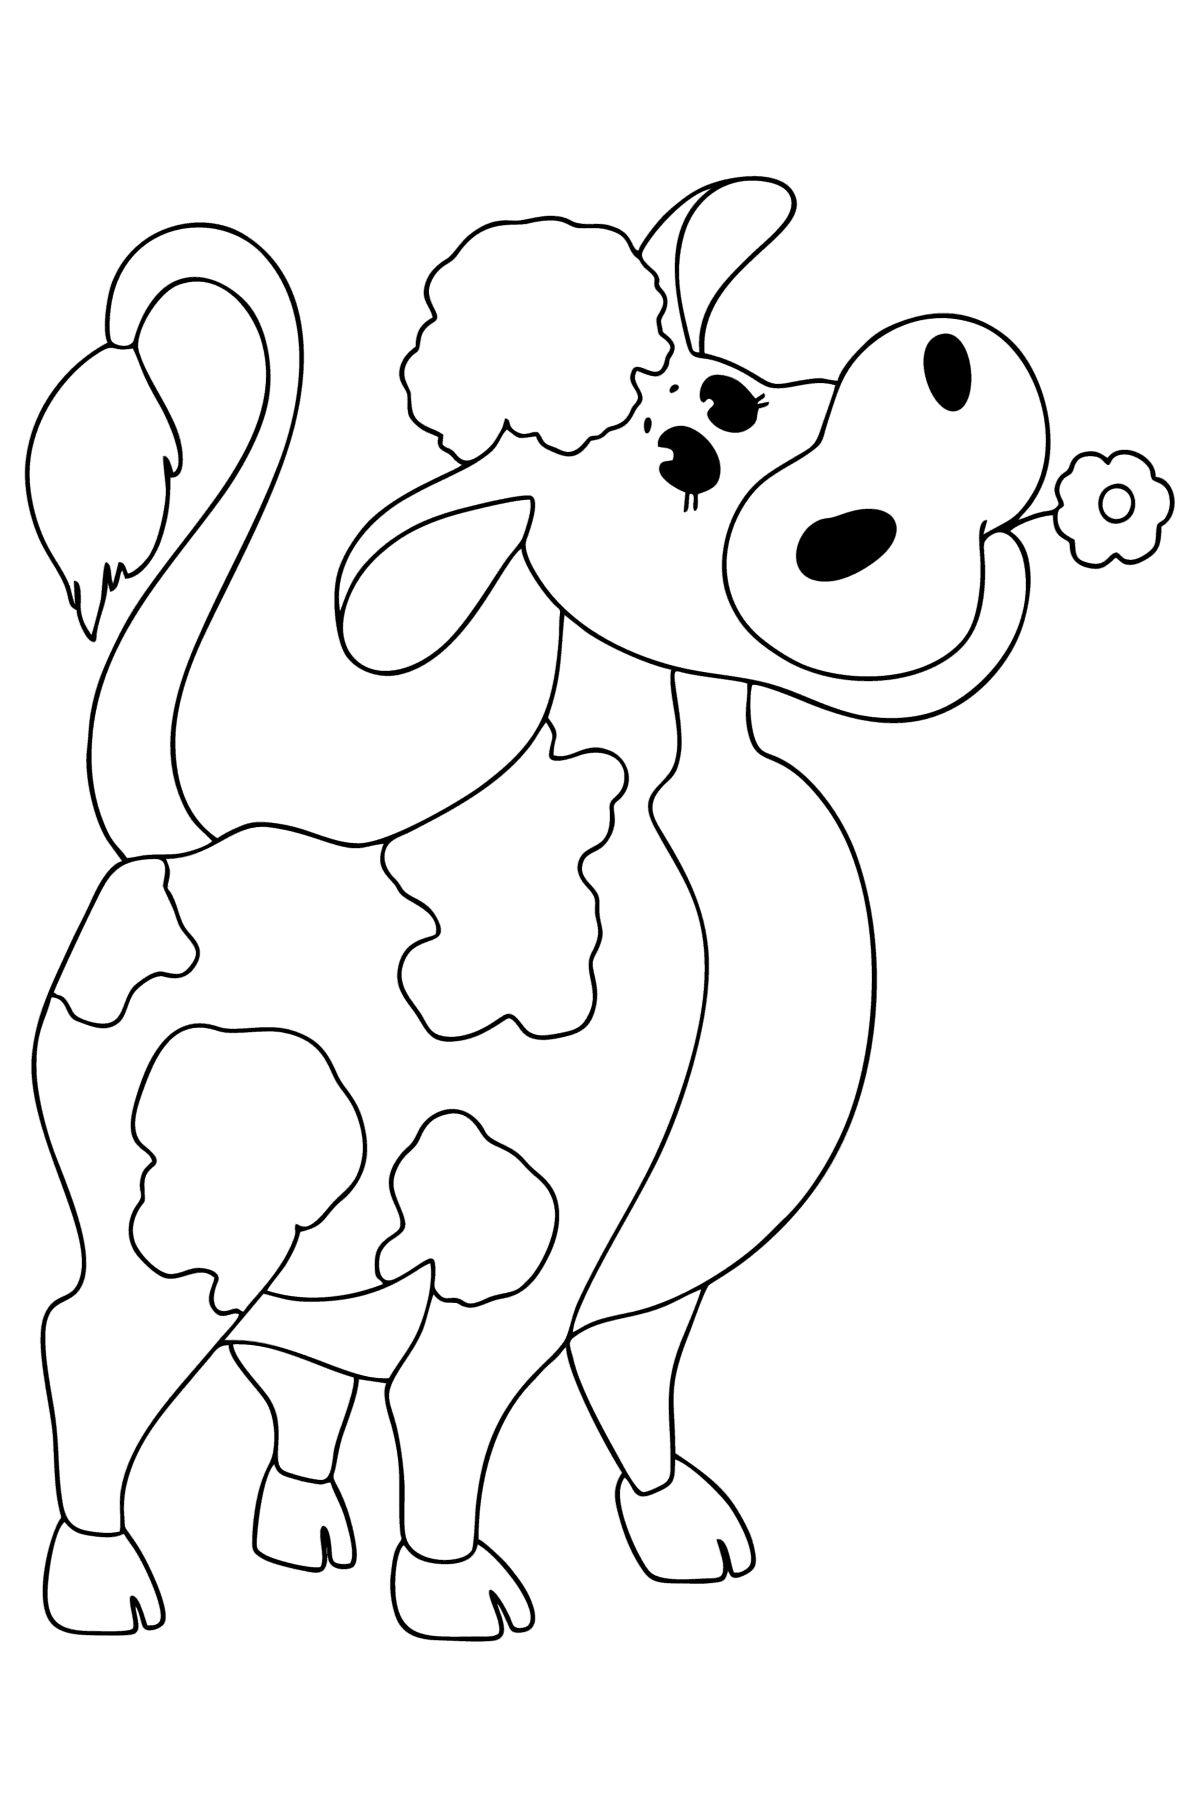 Baby cow coloring pages - Coloring Pages for Kids